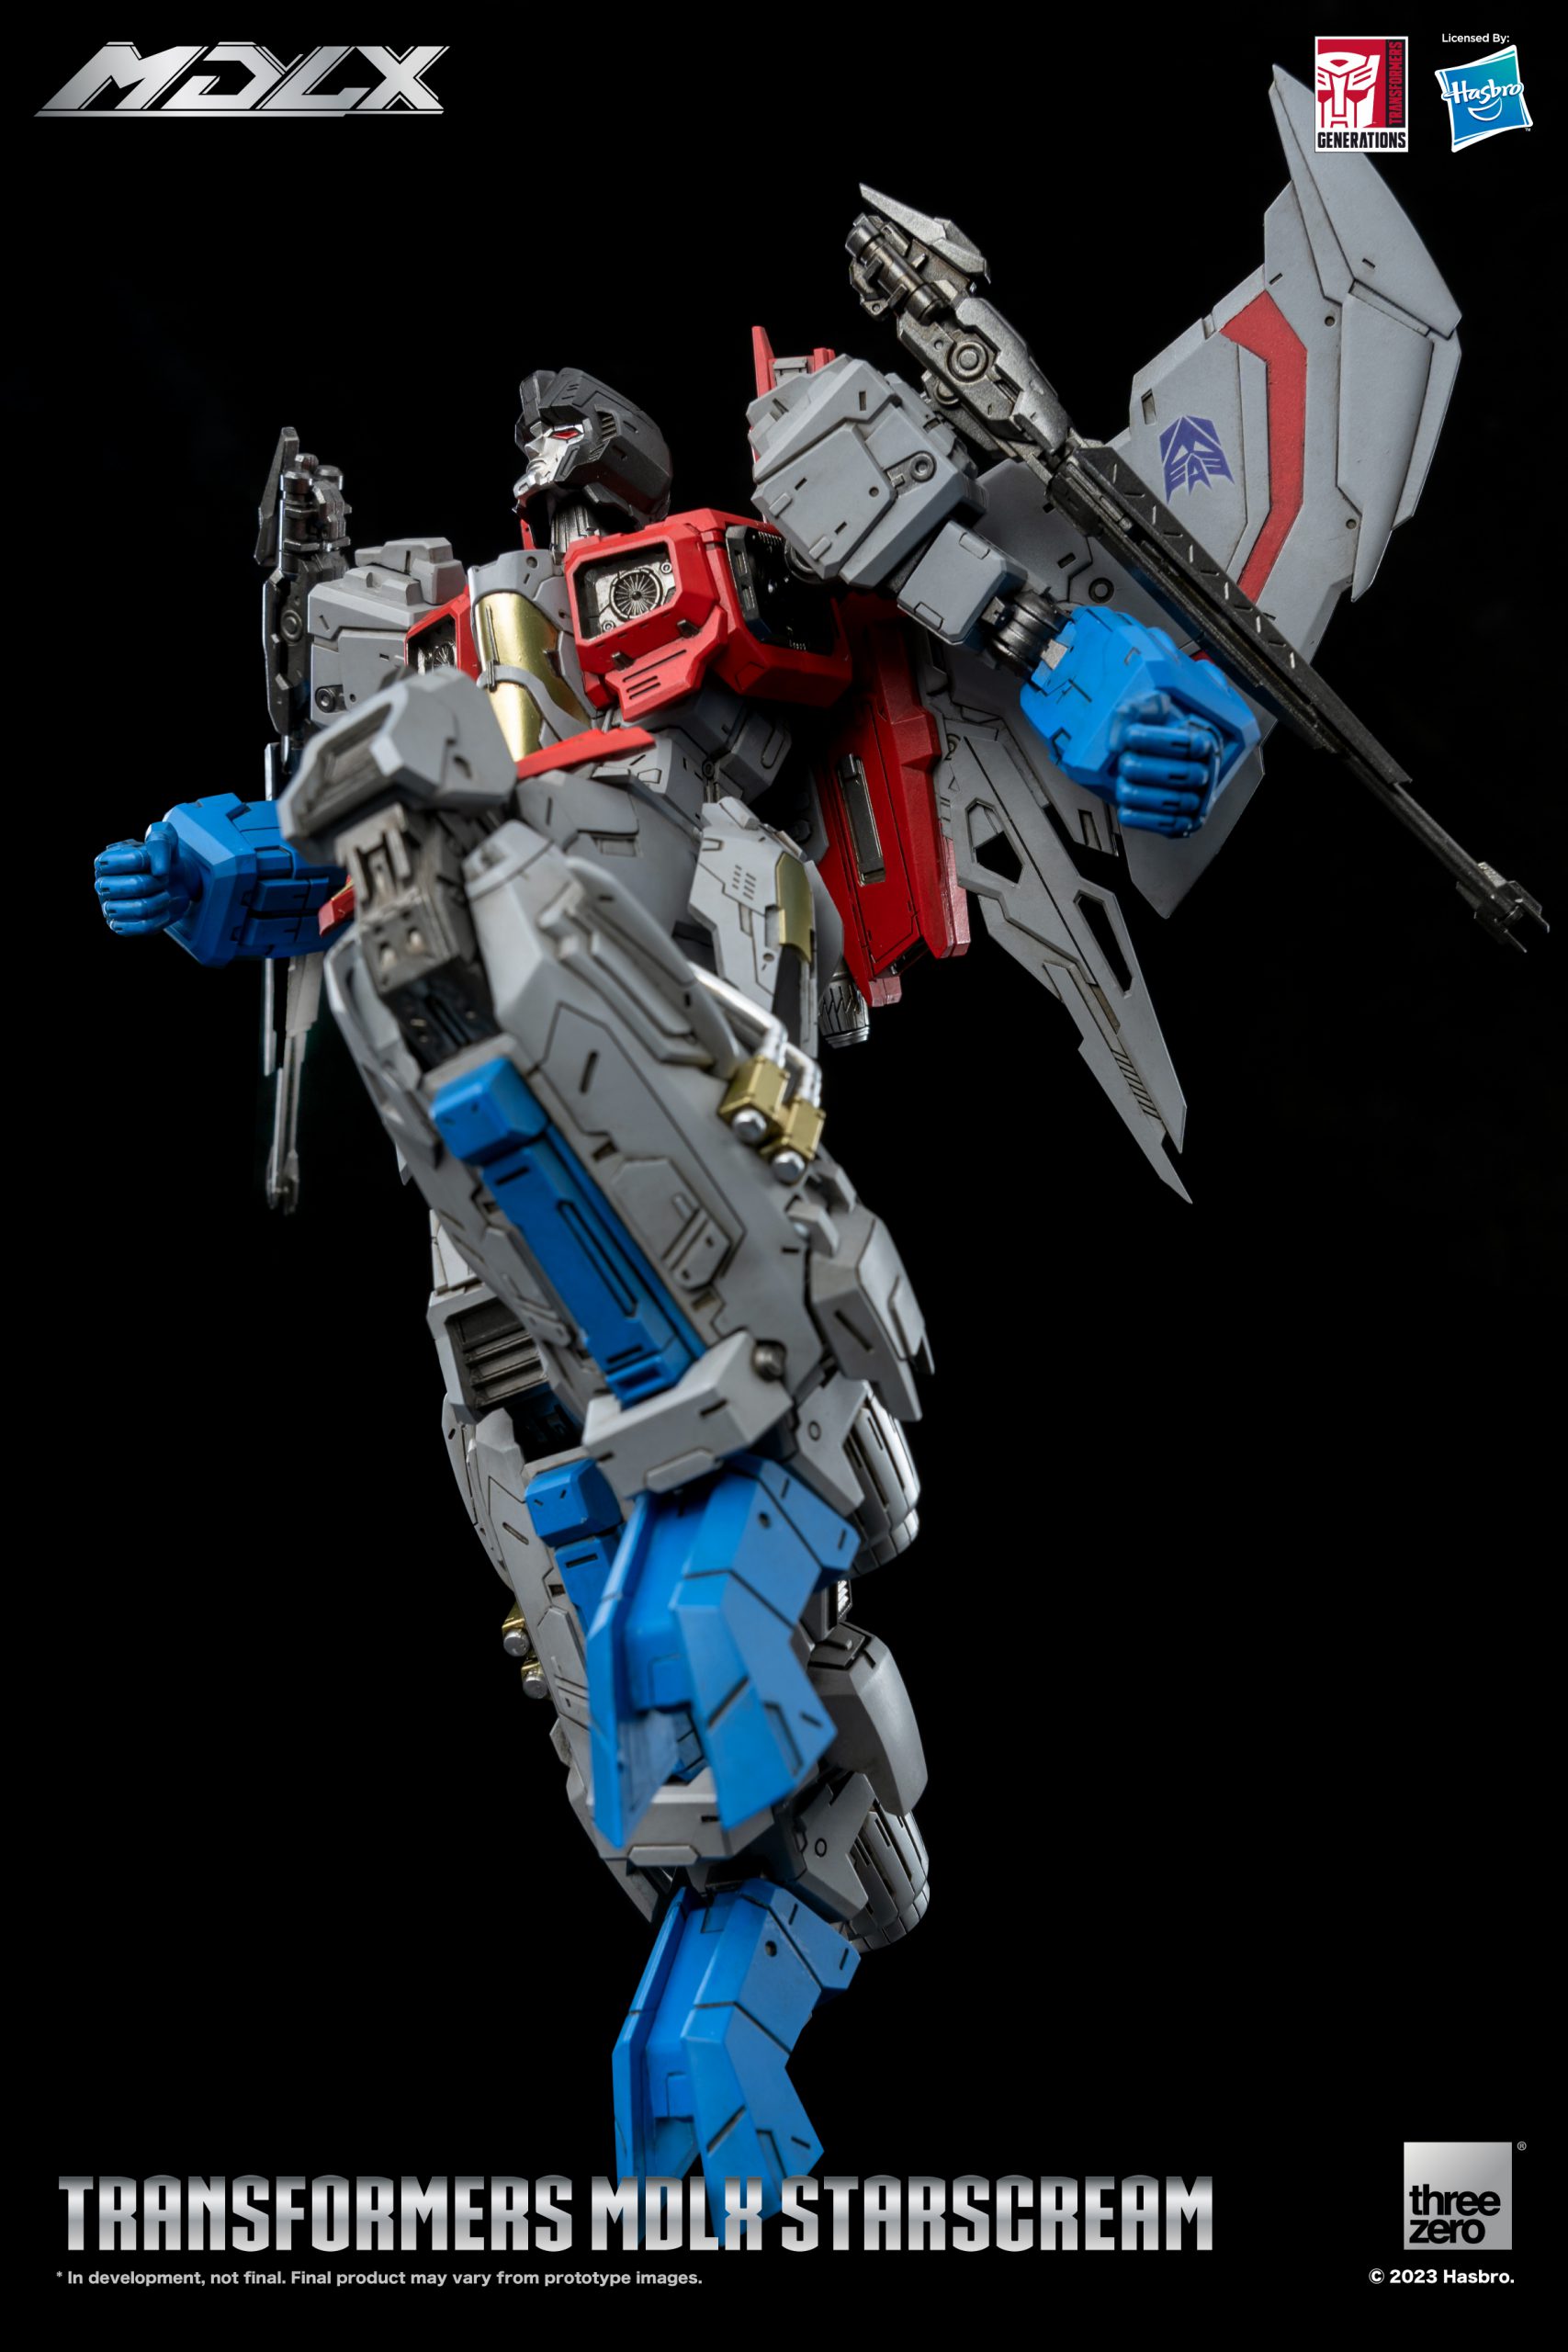 Transformers: Prime, Optimus Stands Strong